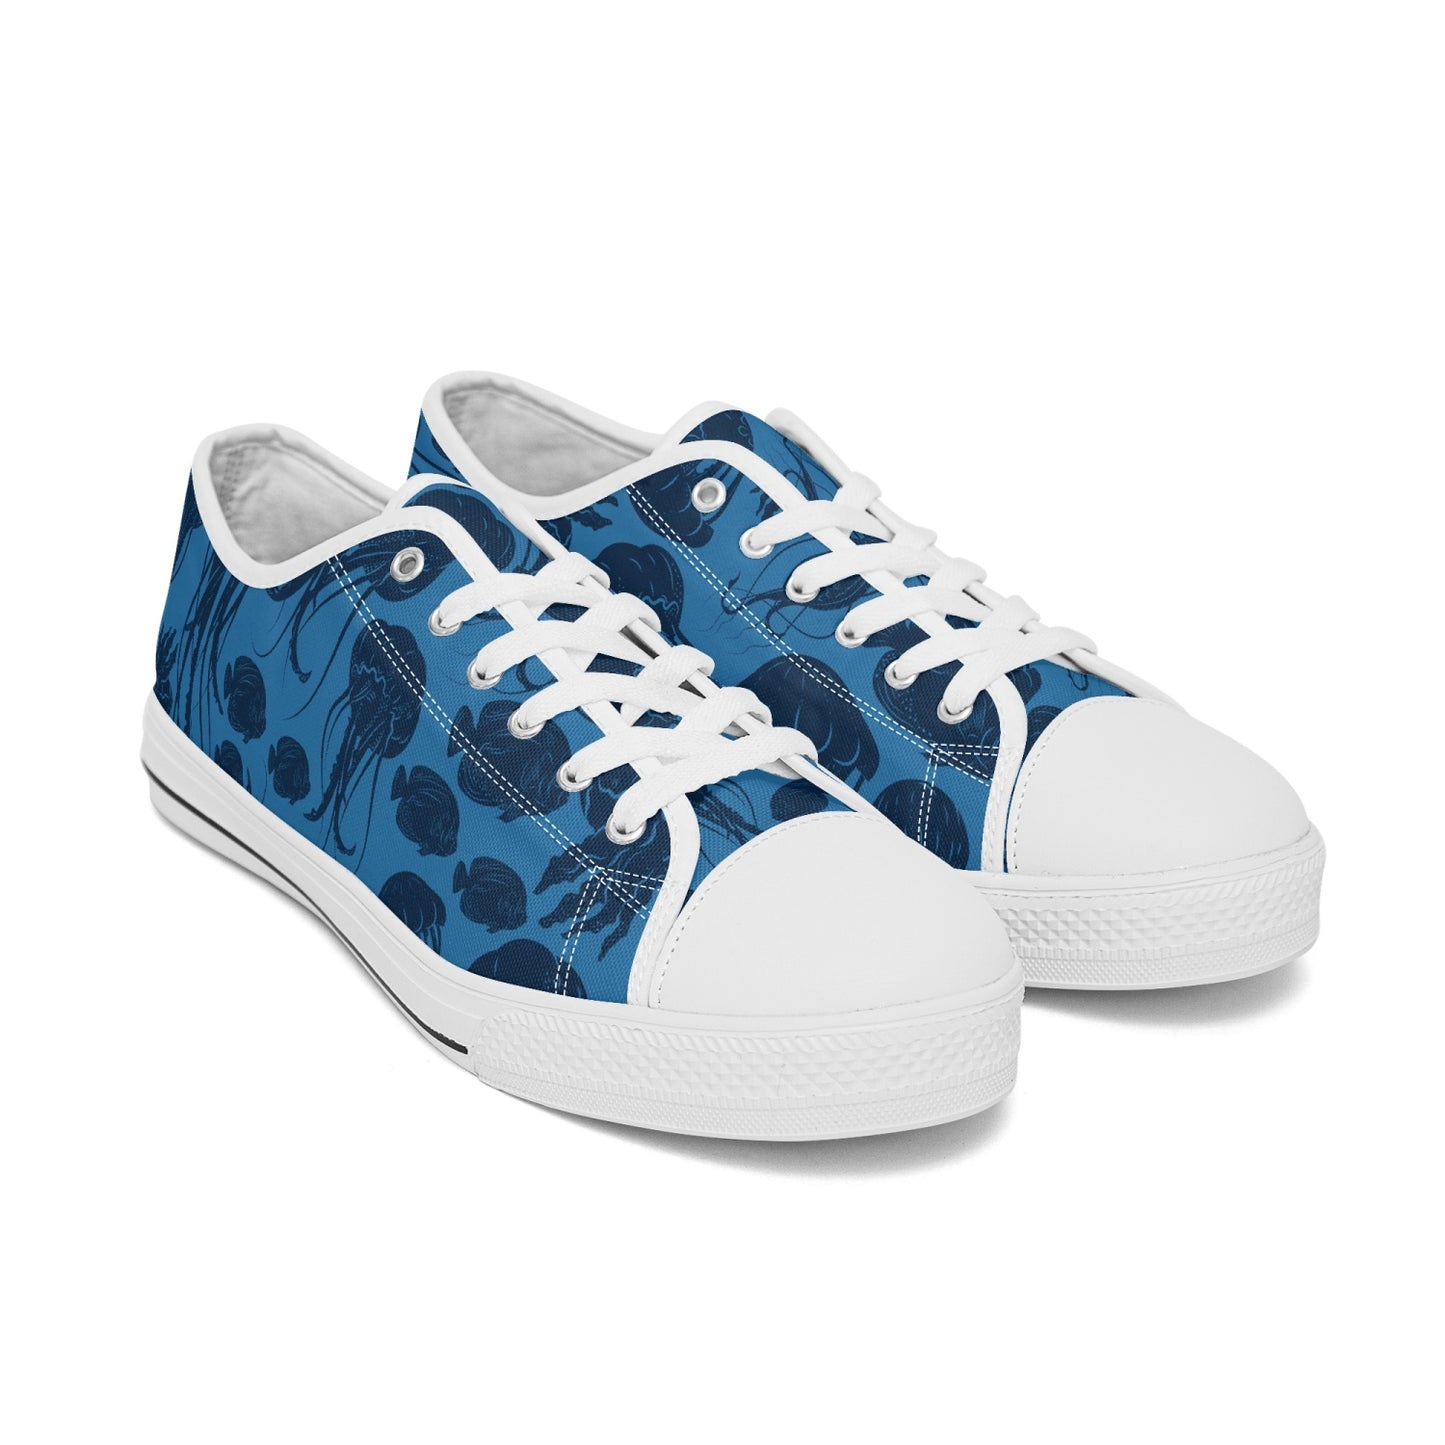 Jellyfish Low-Top Canvas Shoes